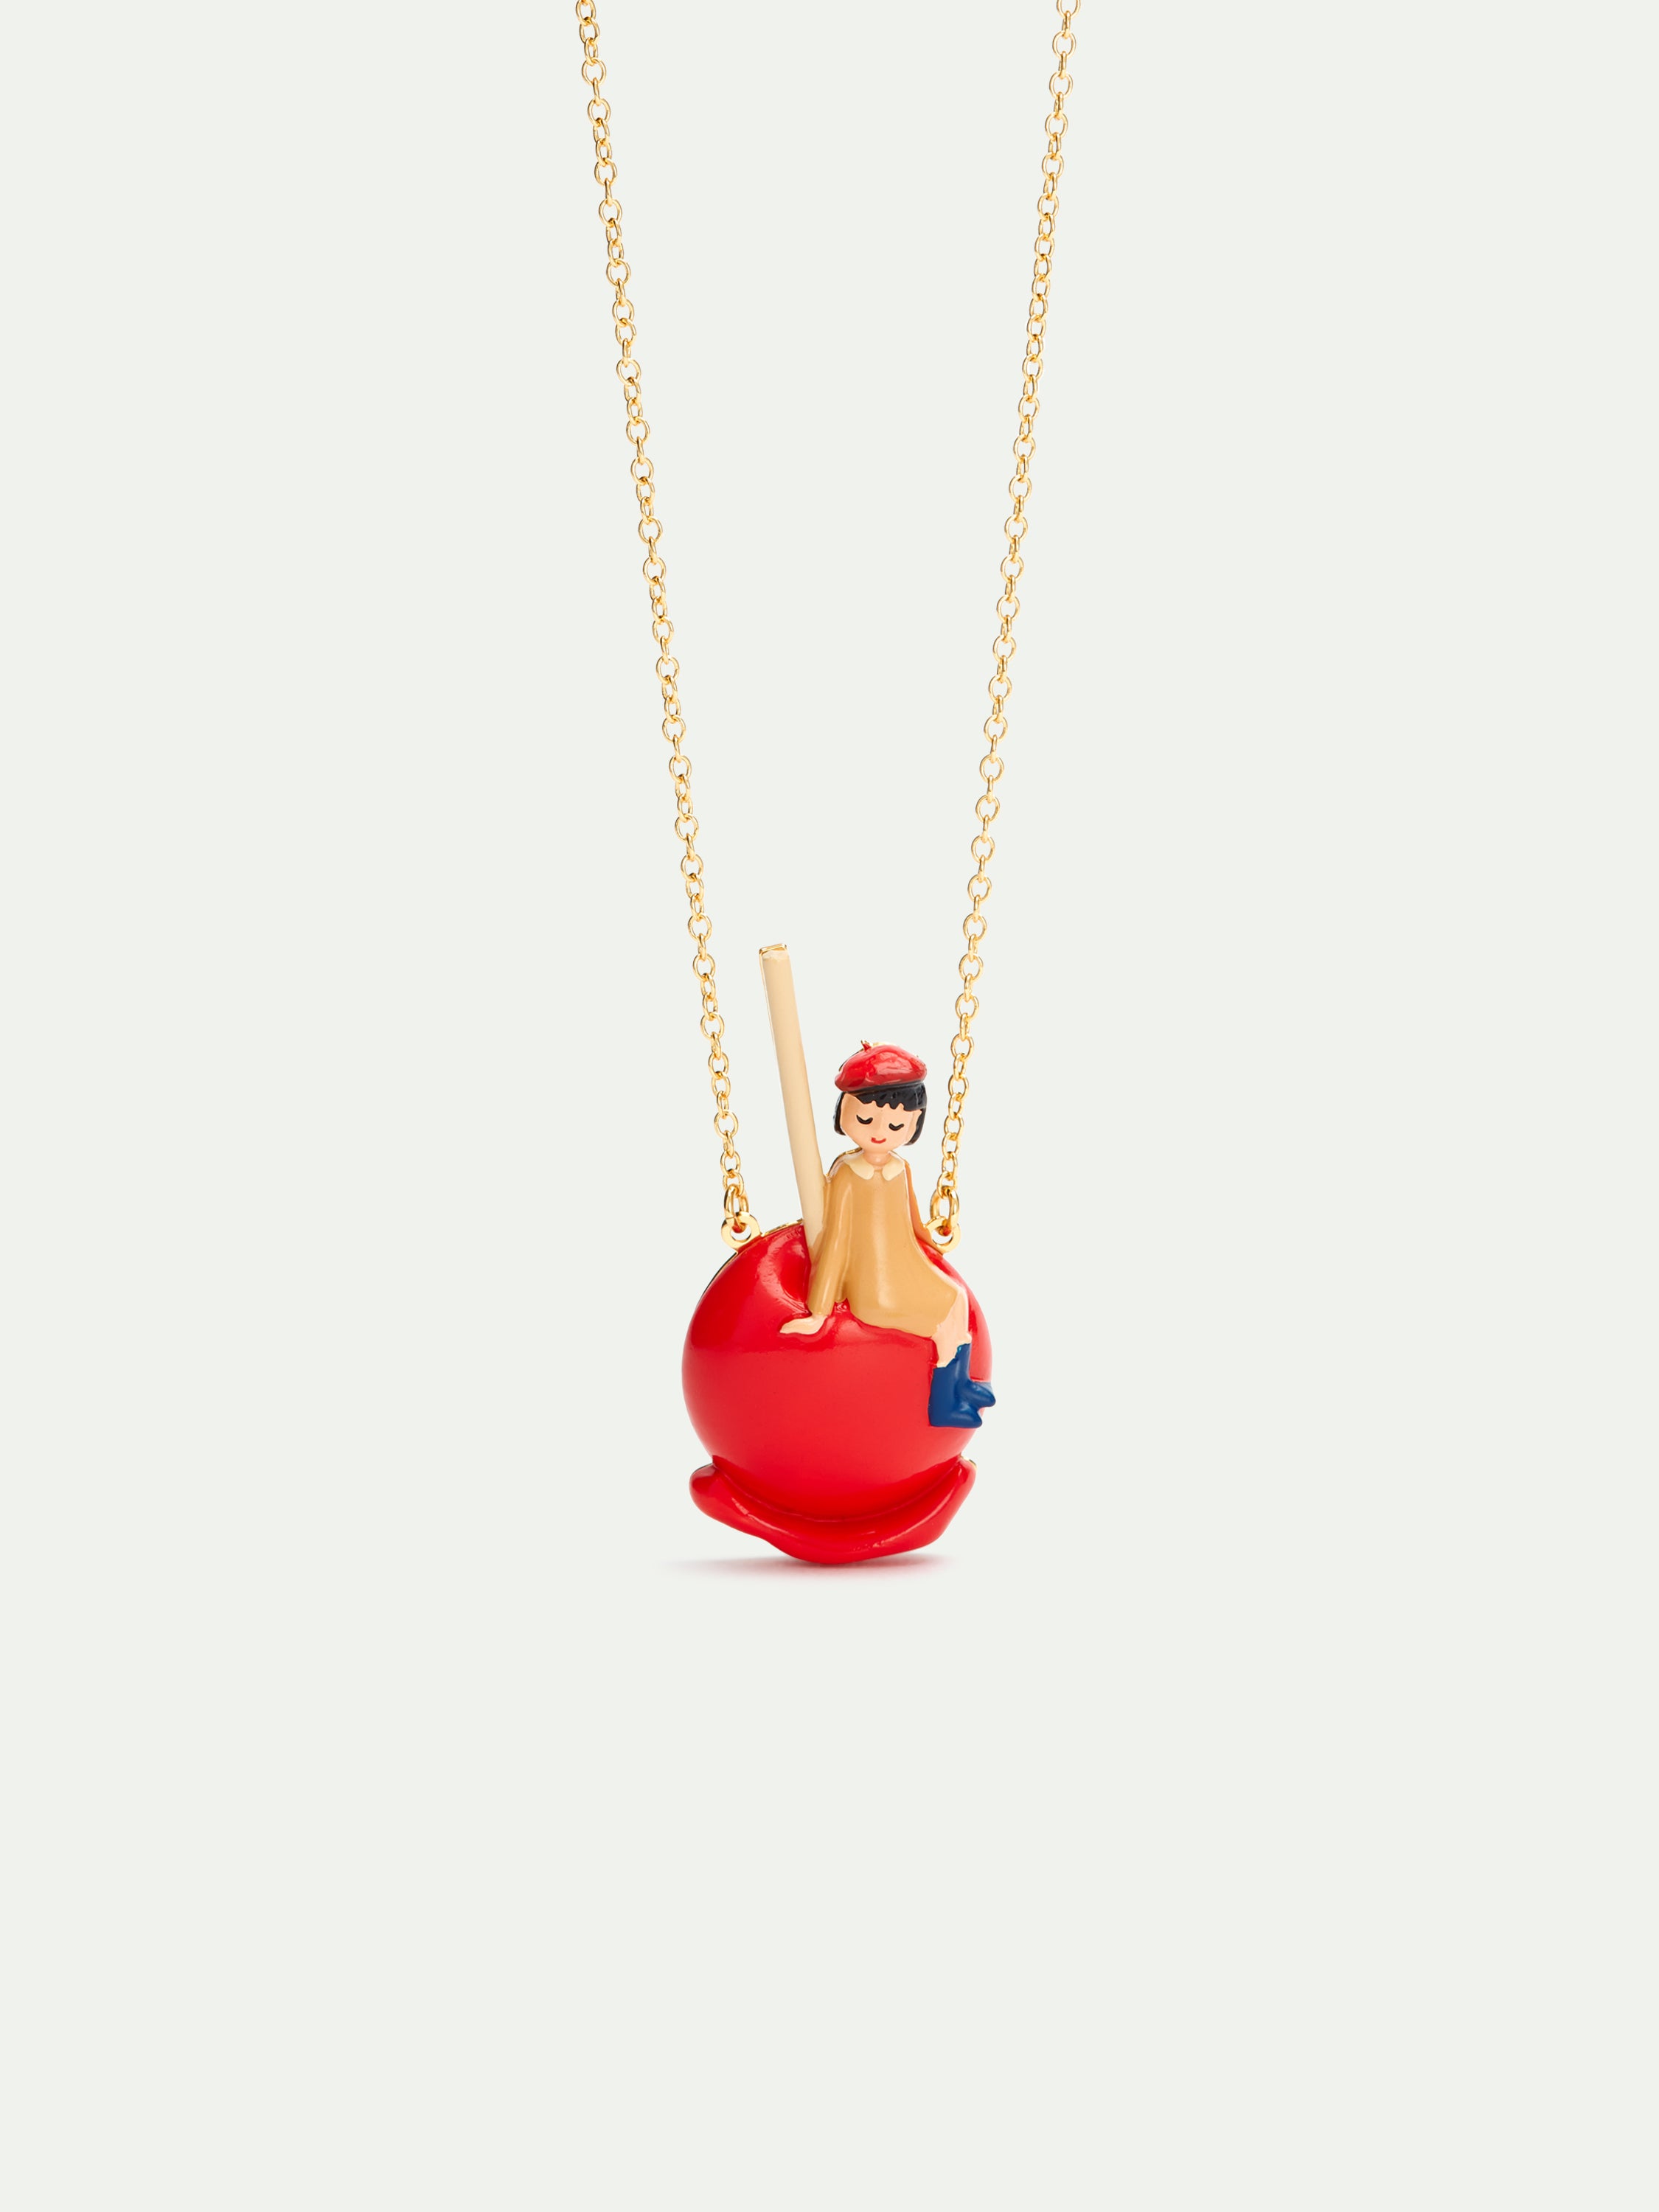 Little girl on a candy apple pendant necklace